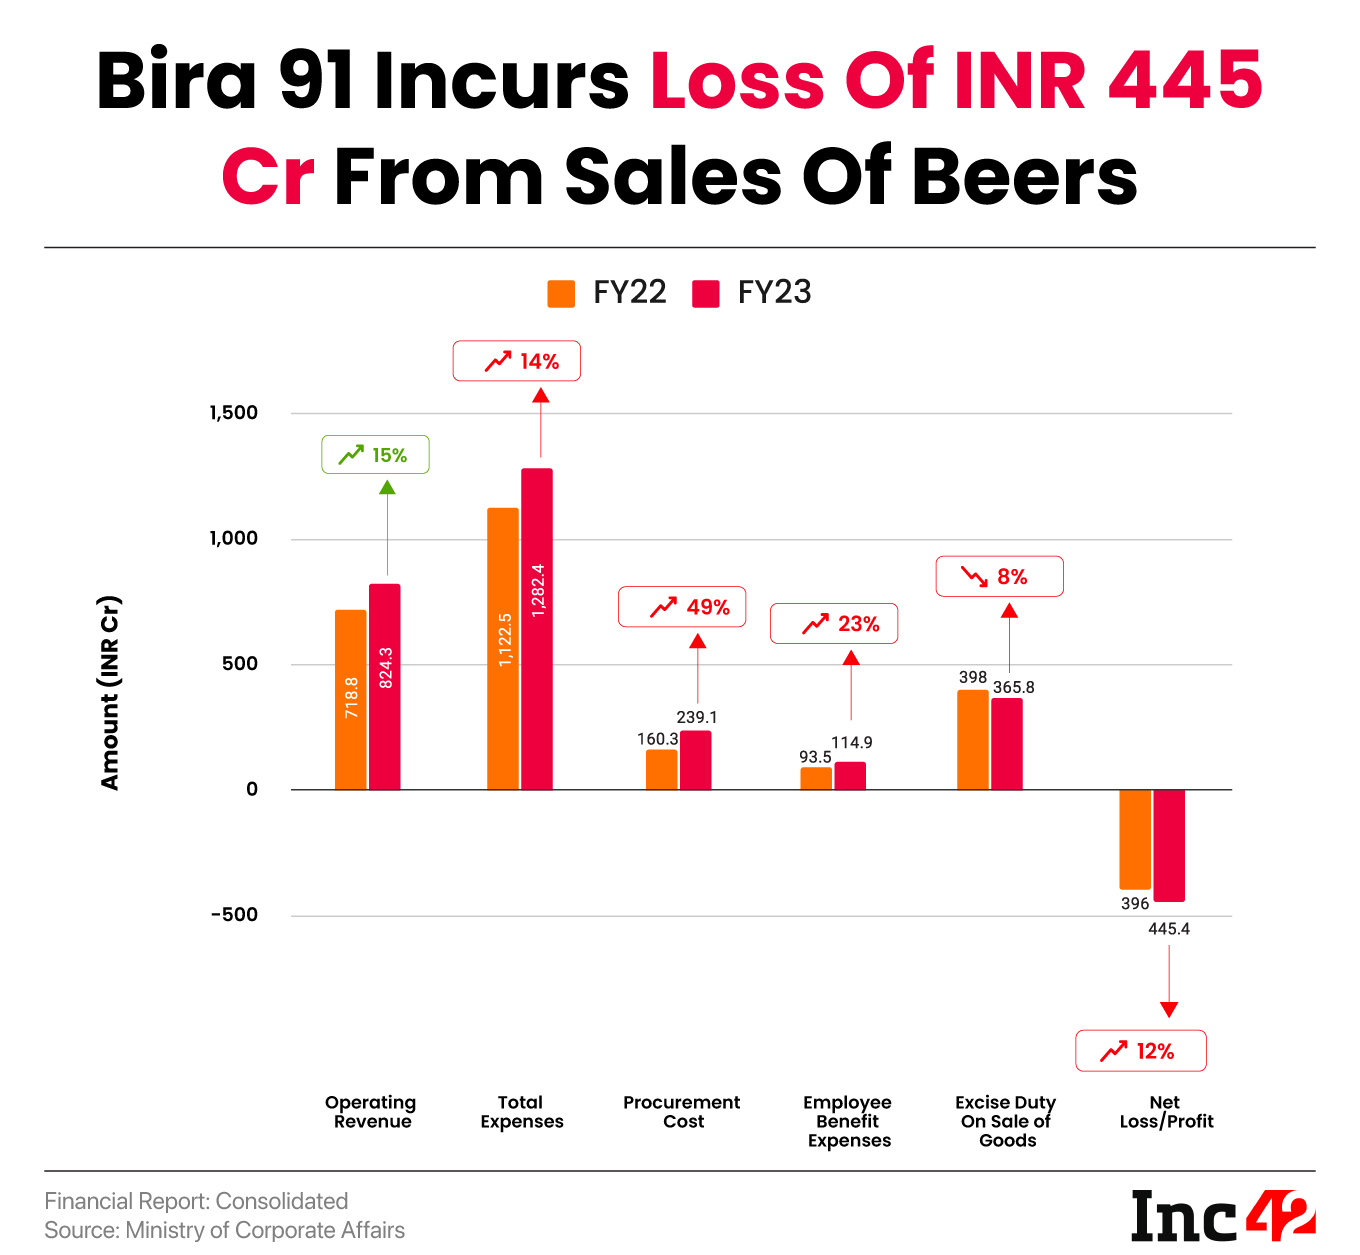 Bira 91 Incurred Loss Of INR 445 Cr From Sales Of Beers In FY23